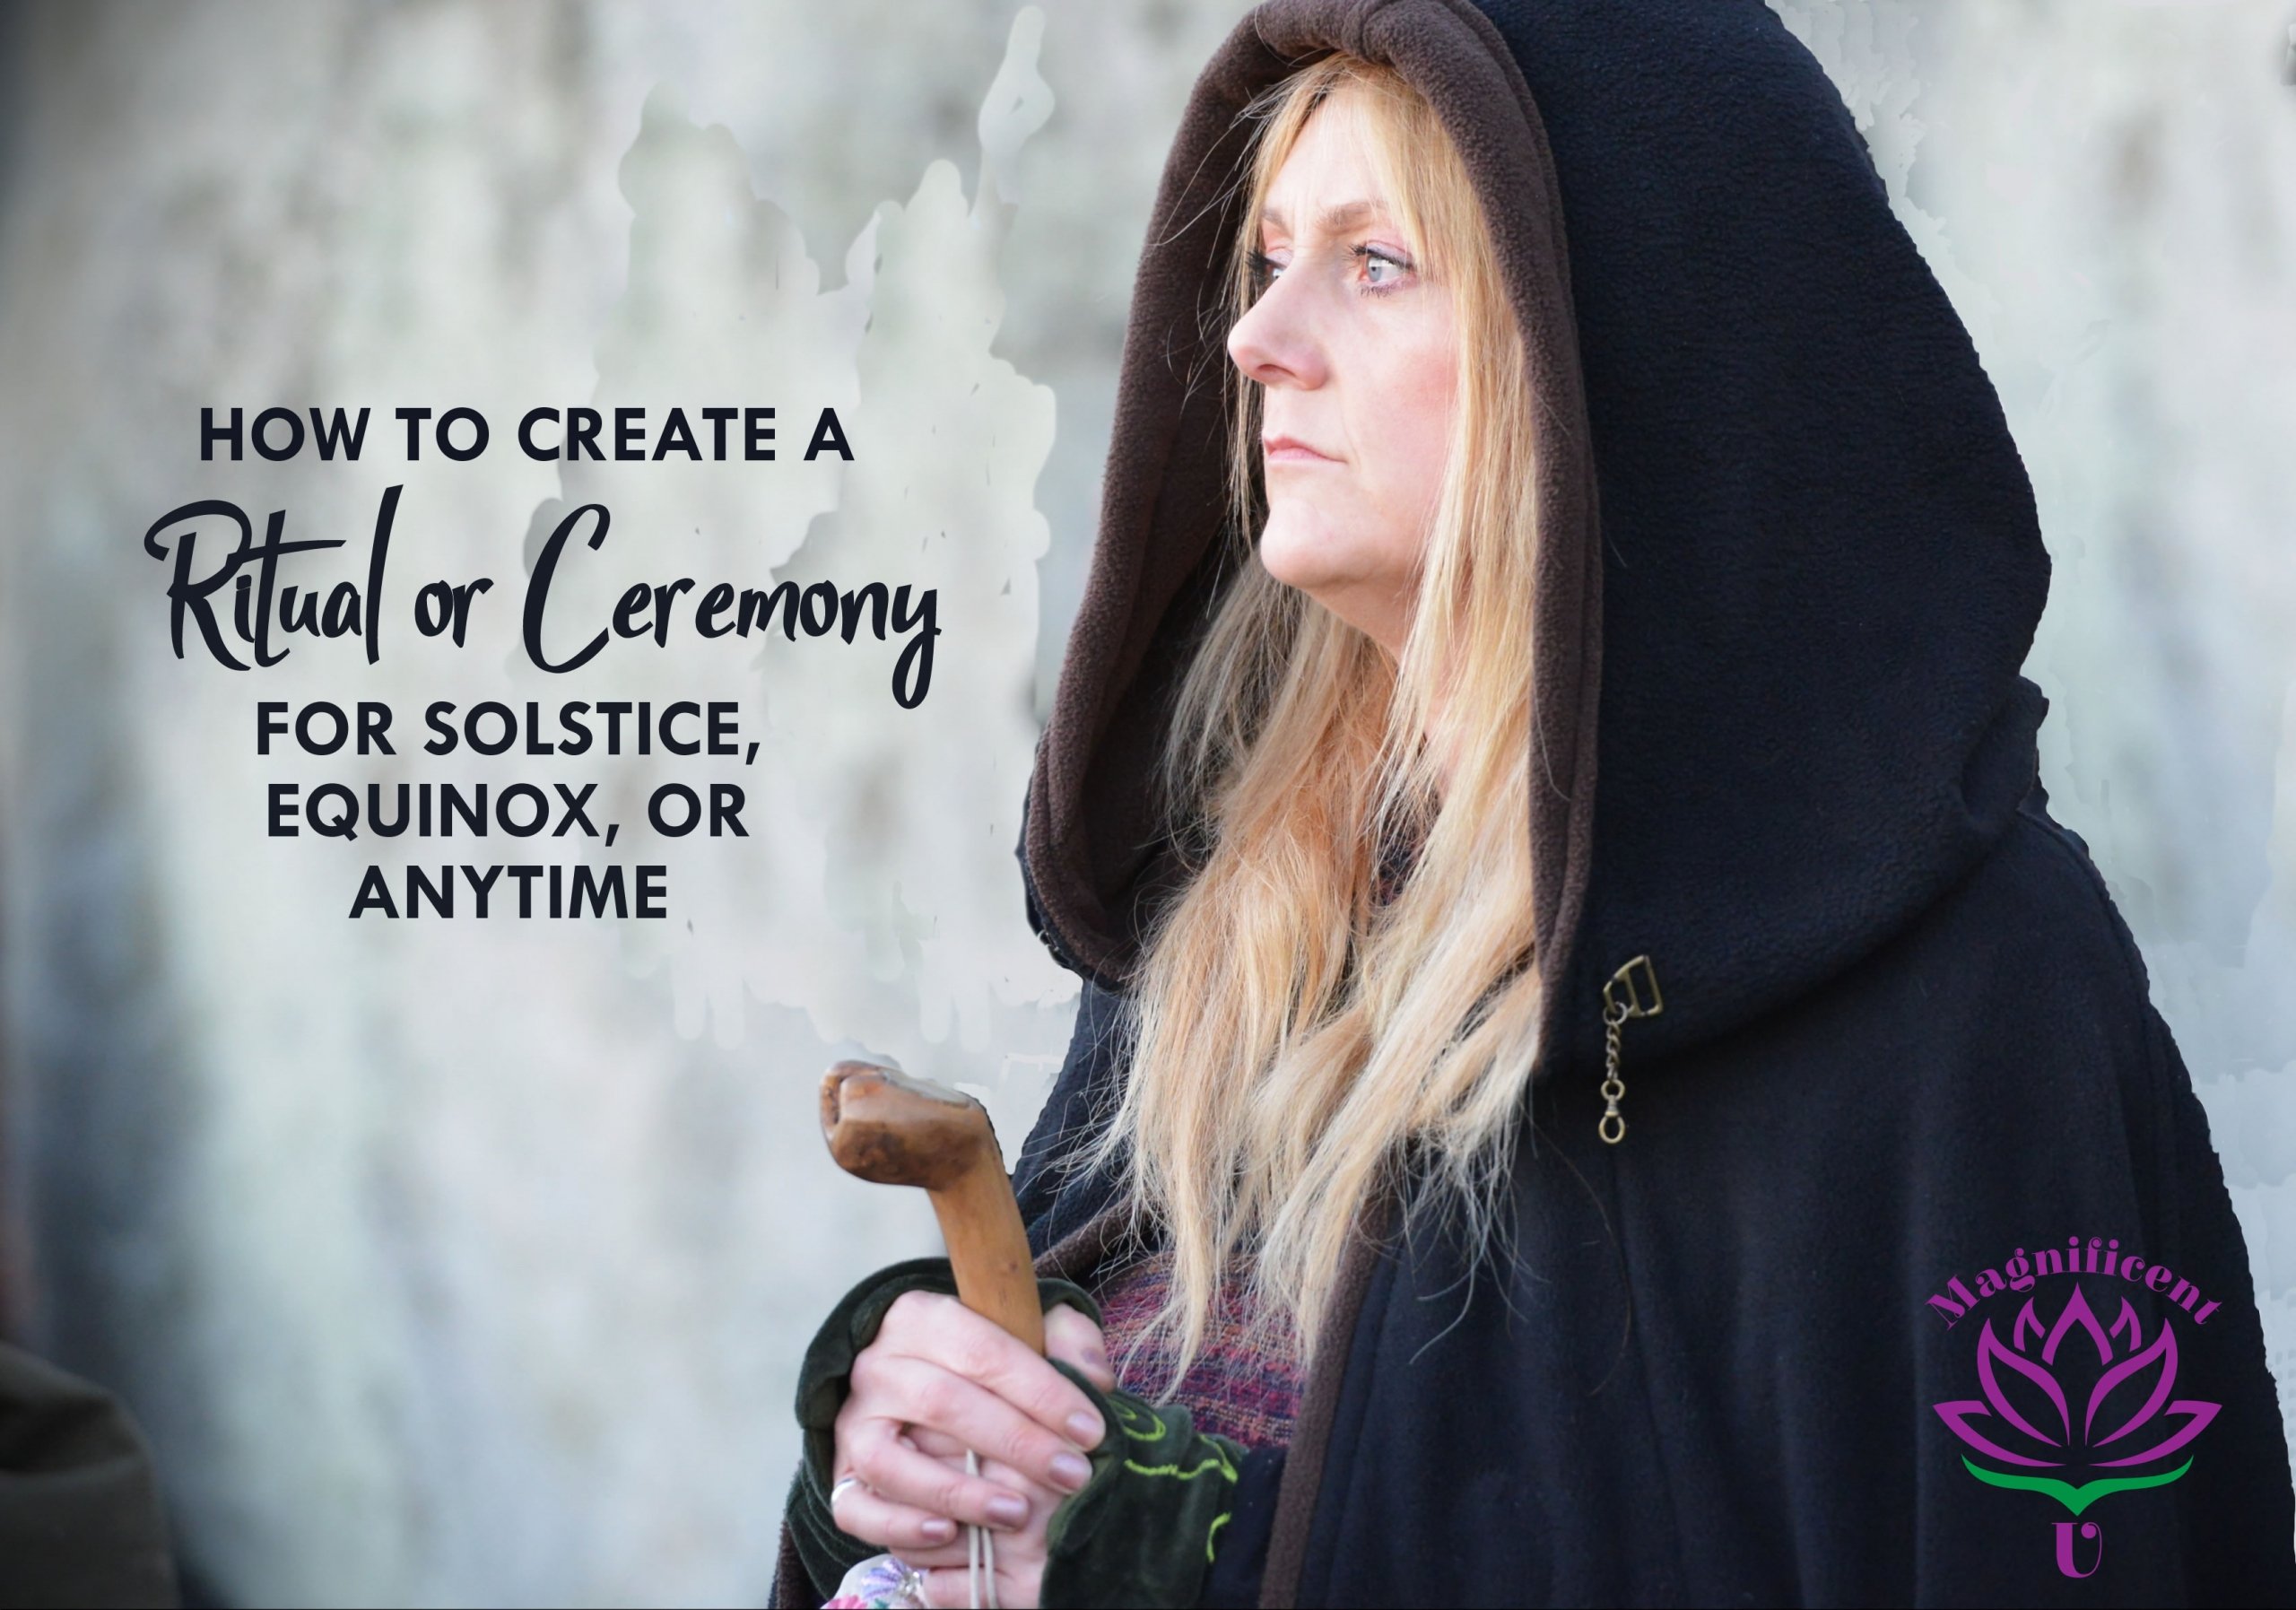 How to Create a Ritual or Ceremony